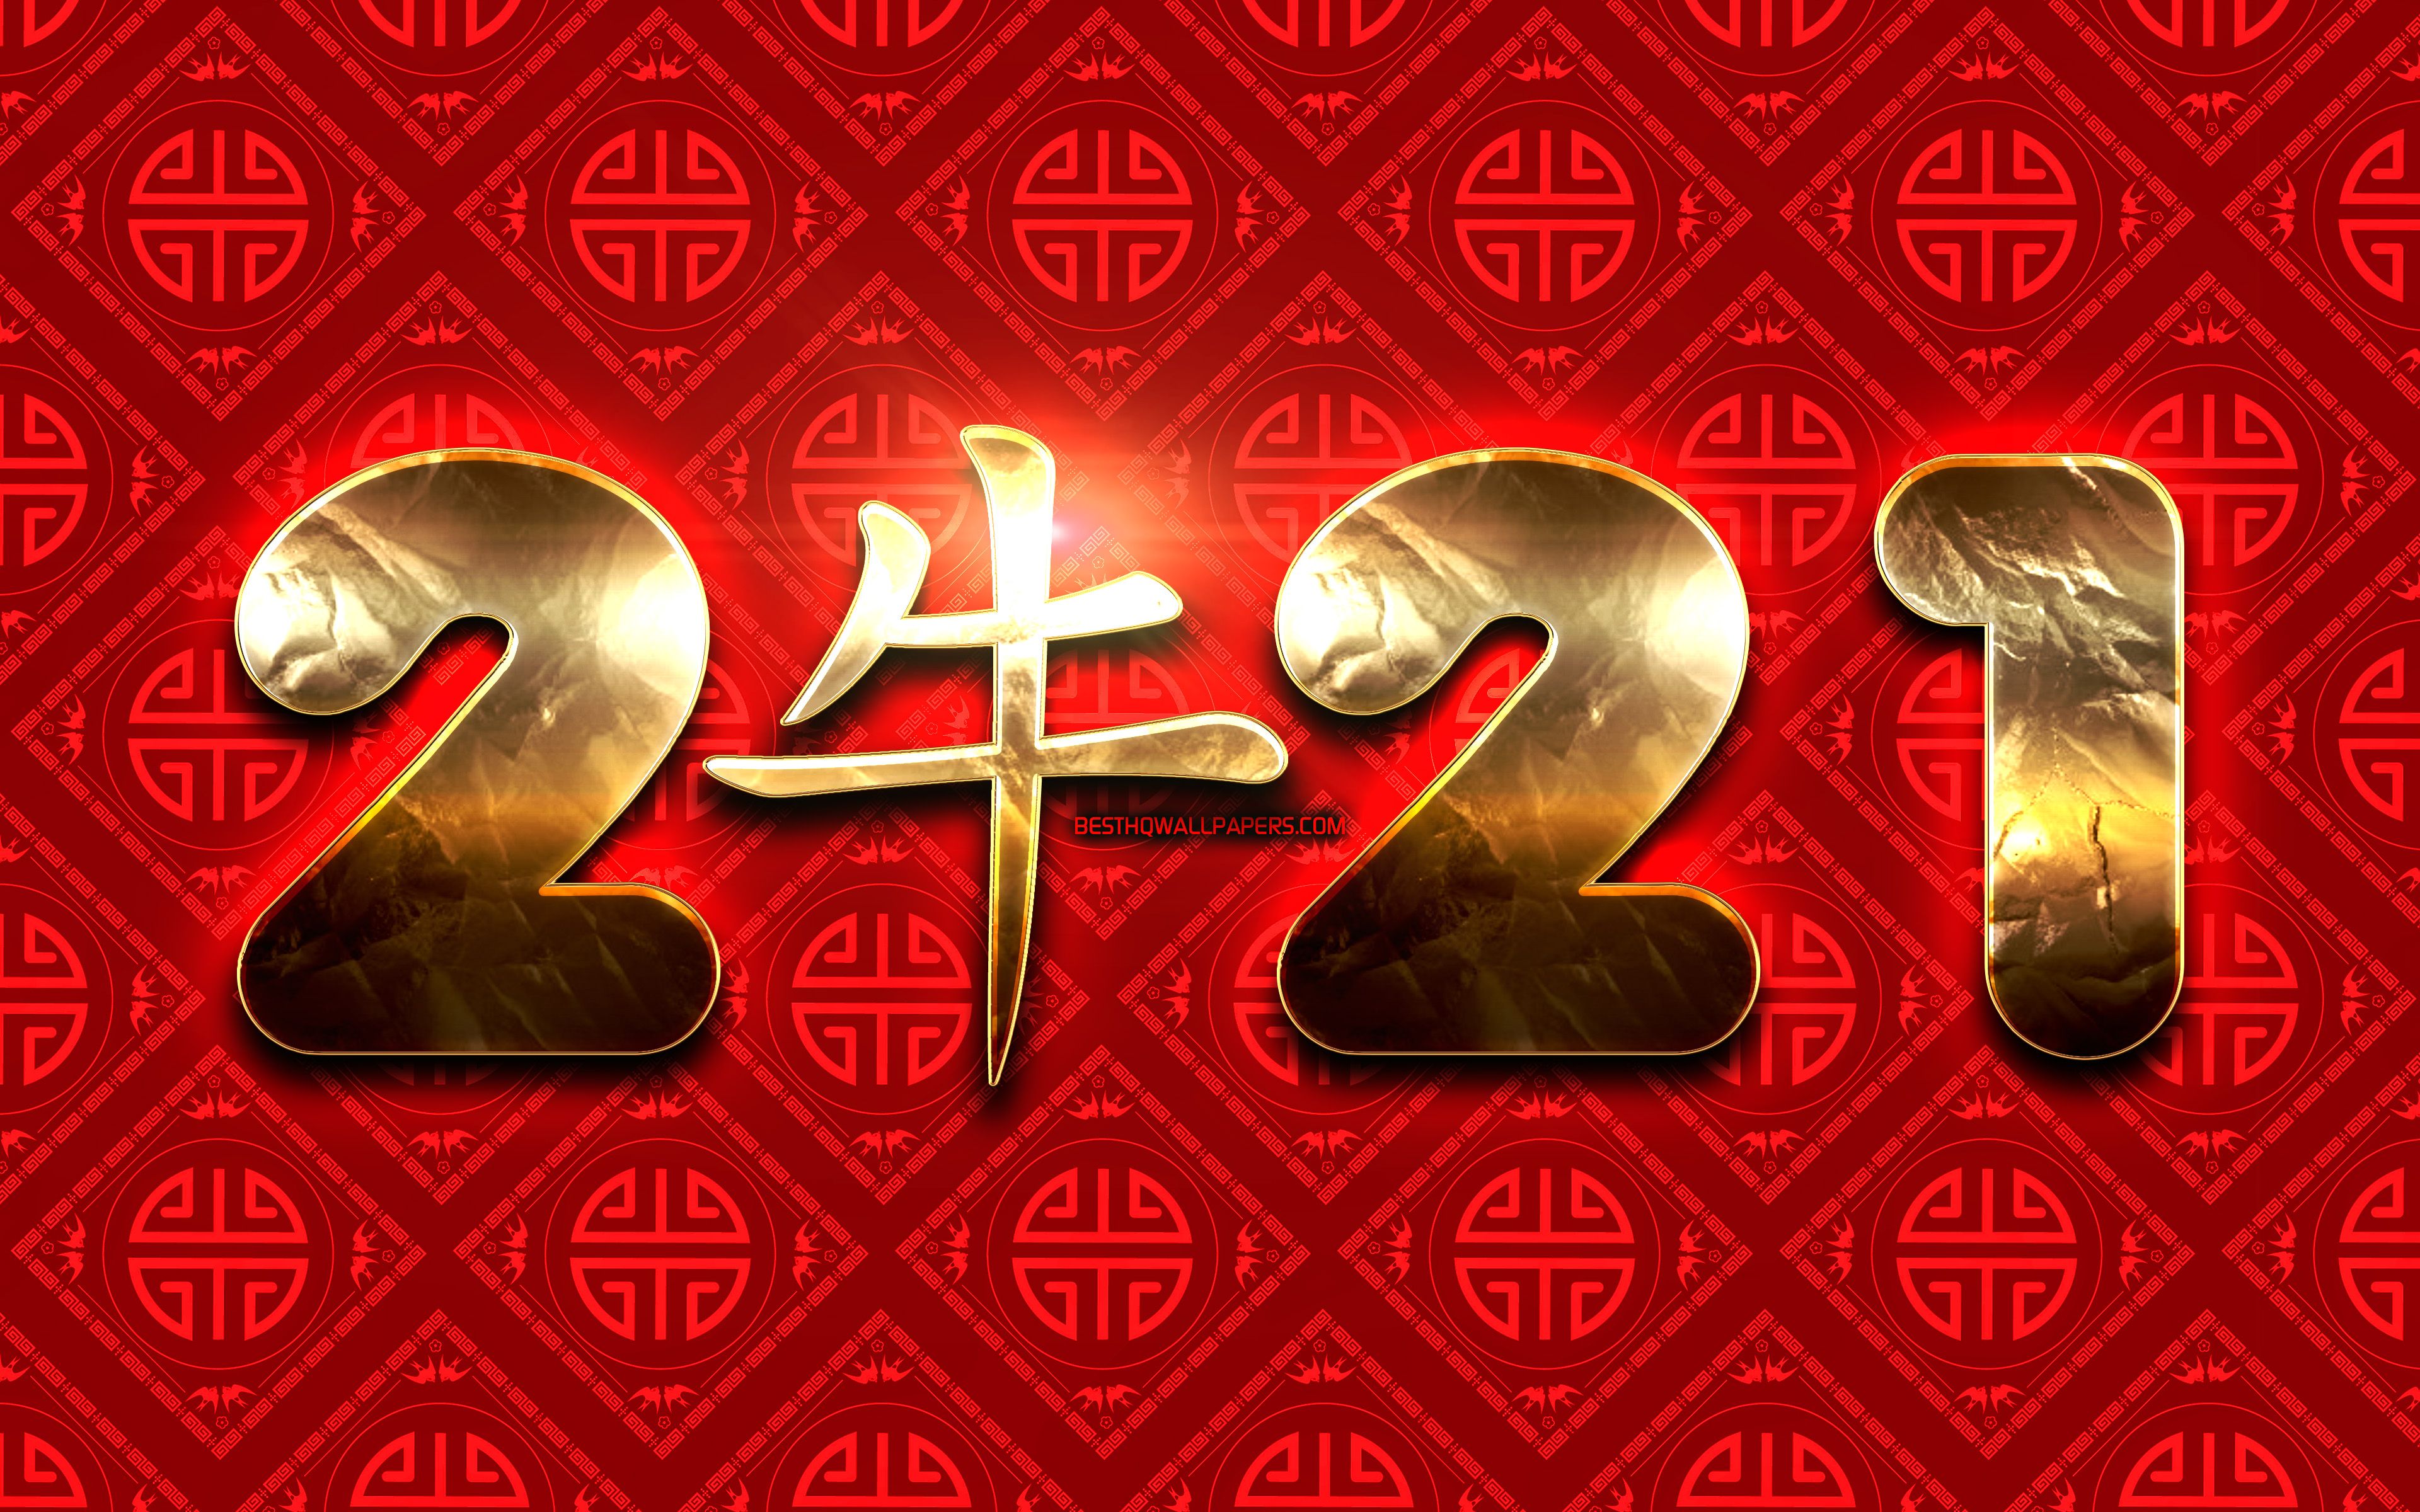 Download wallpaper 2021 golden digits, 4k, Ox zodiac sign, 2021 New Year, red chinese background, year of the Ox, Happy New Year 2021 concepts, 2021 with Ox sign, Chinese calendar, 2021